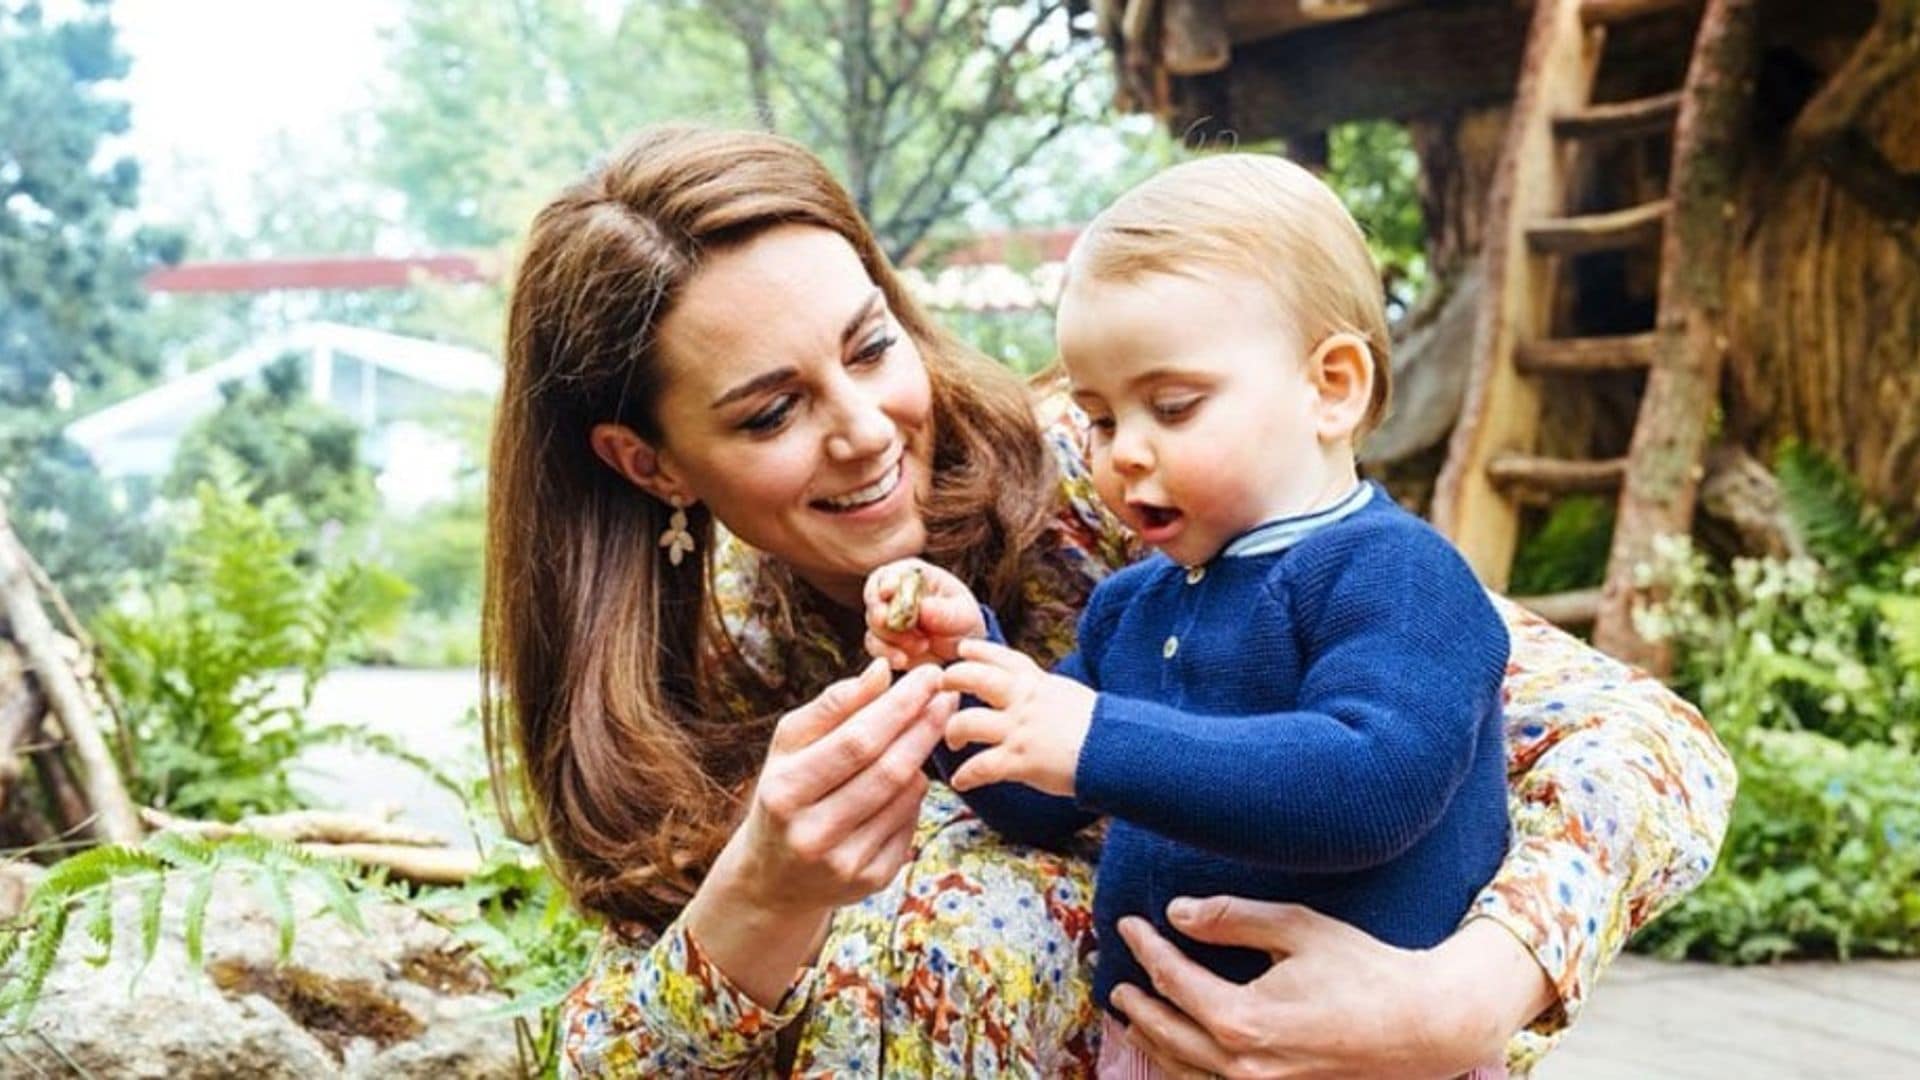 Prince William and Kate Middleton's three children captured in sweet video at Chelsea Flower Show